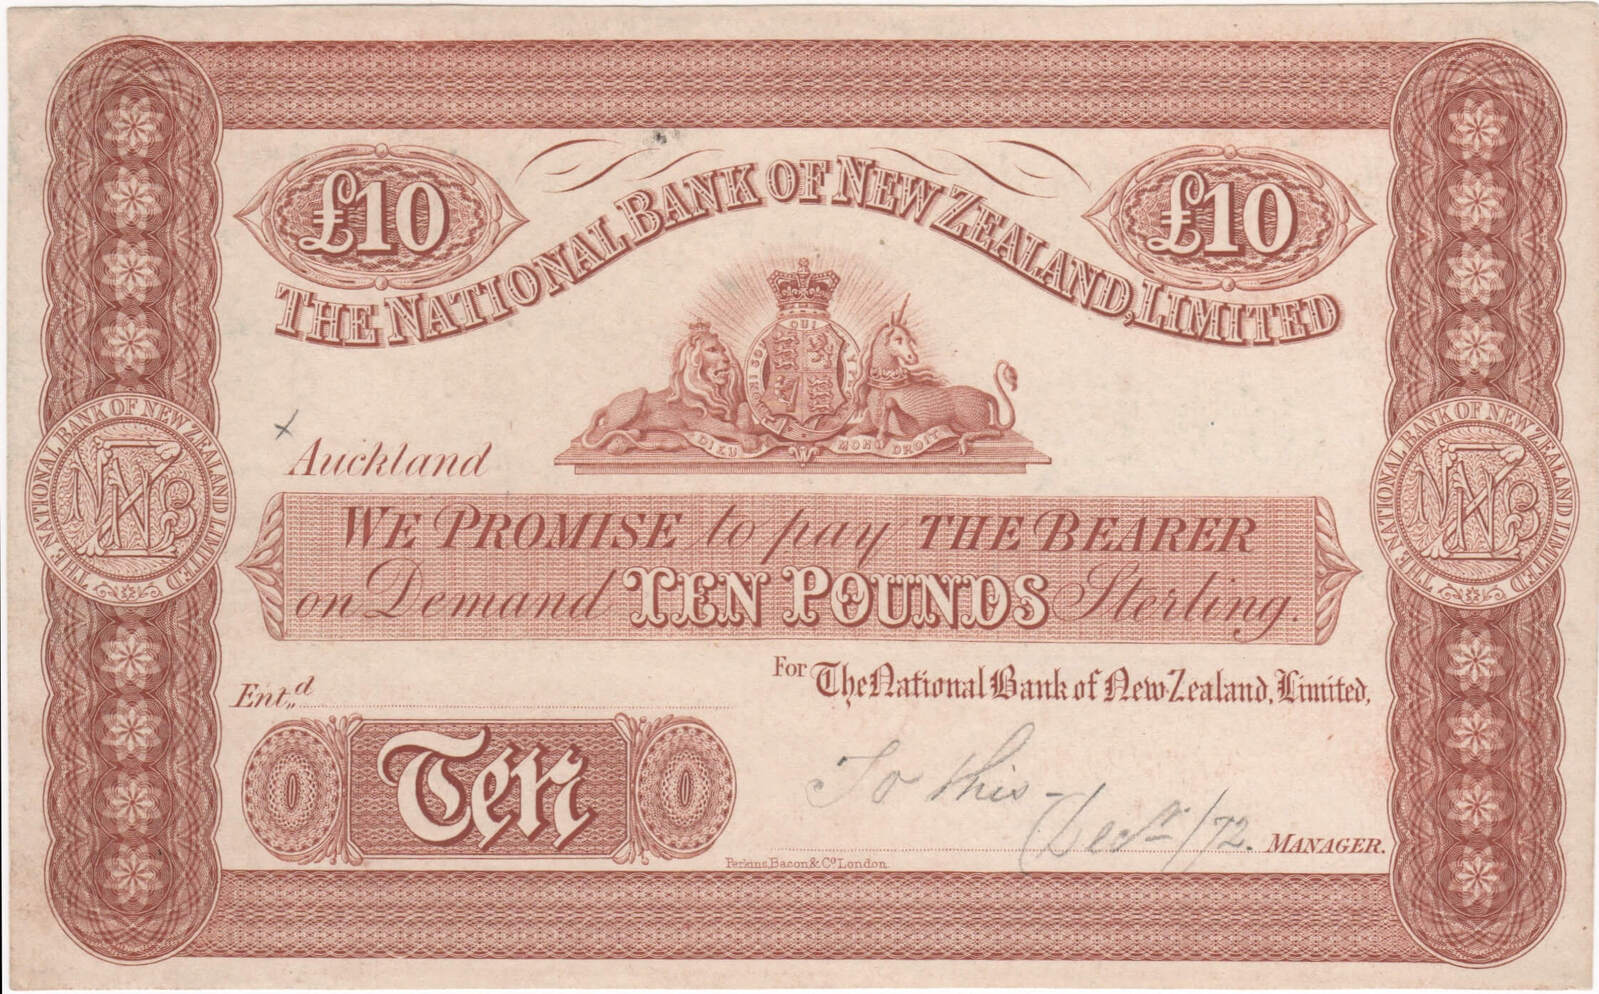 New Zealand (Nat Bank of NZ) 1872 10 Pound Unissued Printer's Proof Note Pick# PS293 about Unc product image